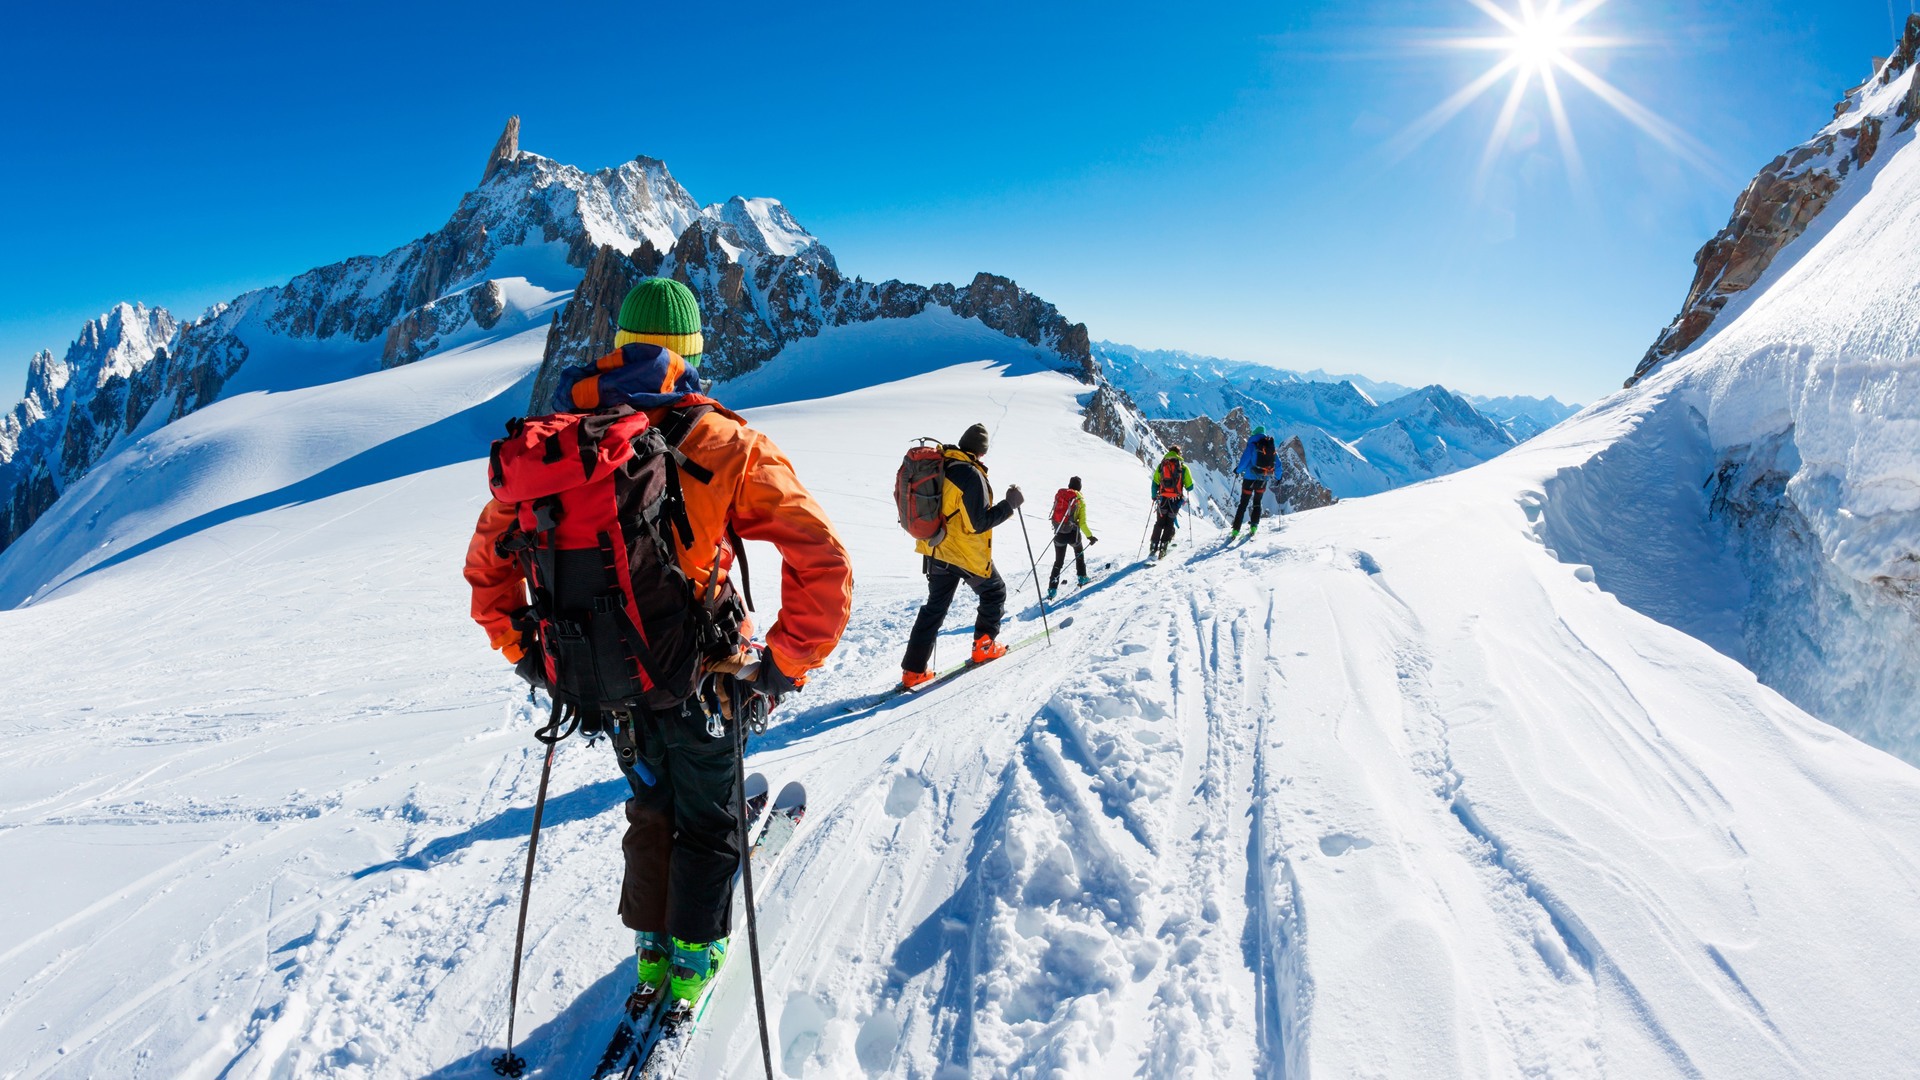 Explore more winter activities in the French Alps